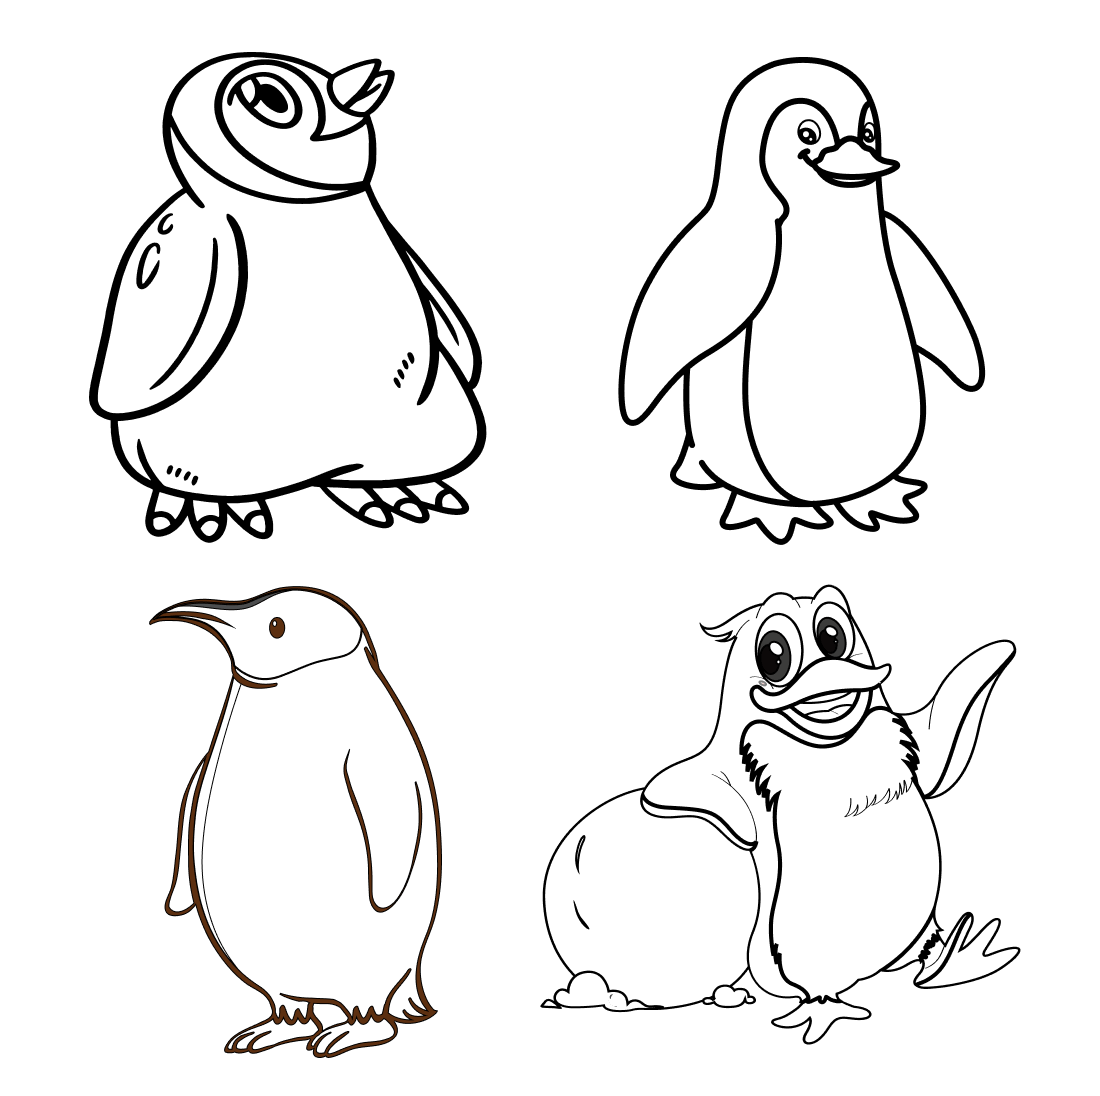 Penguins with big paws are drawn in outline on a white background.